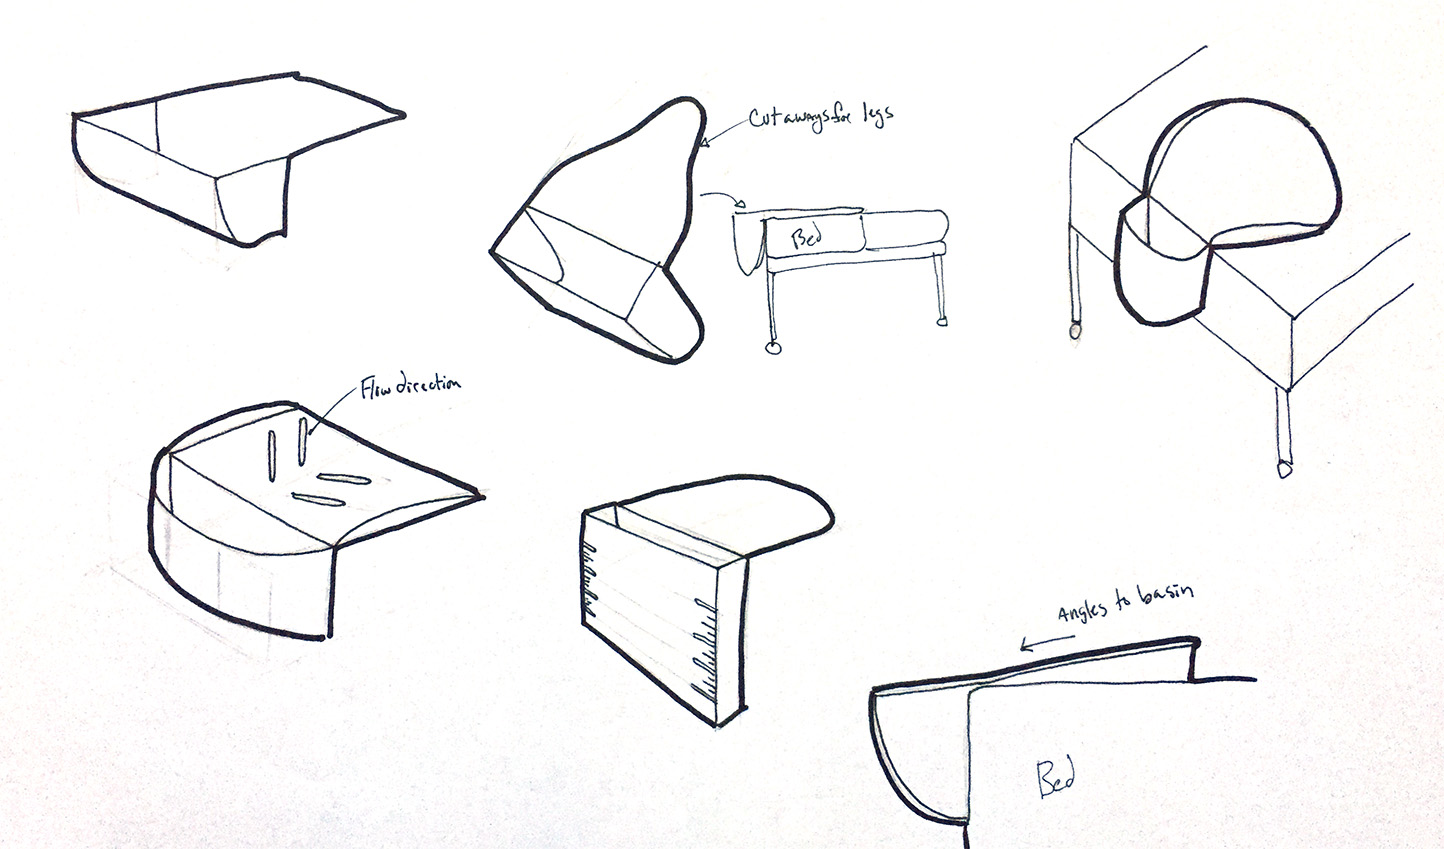 measure device sketches